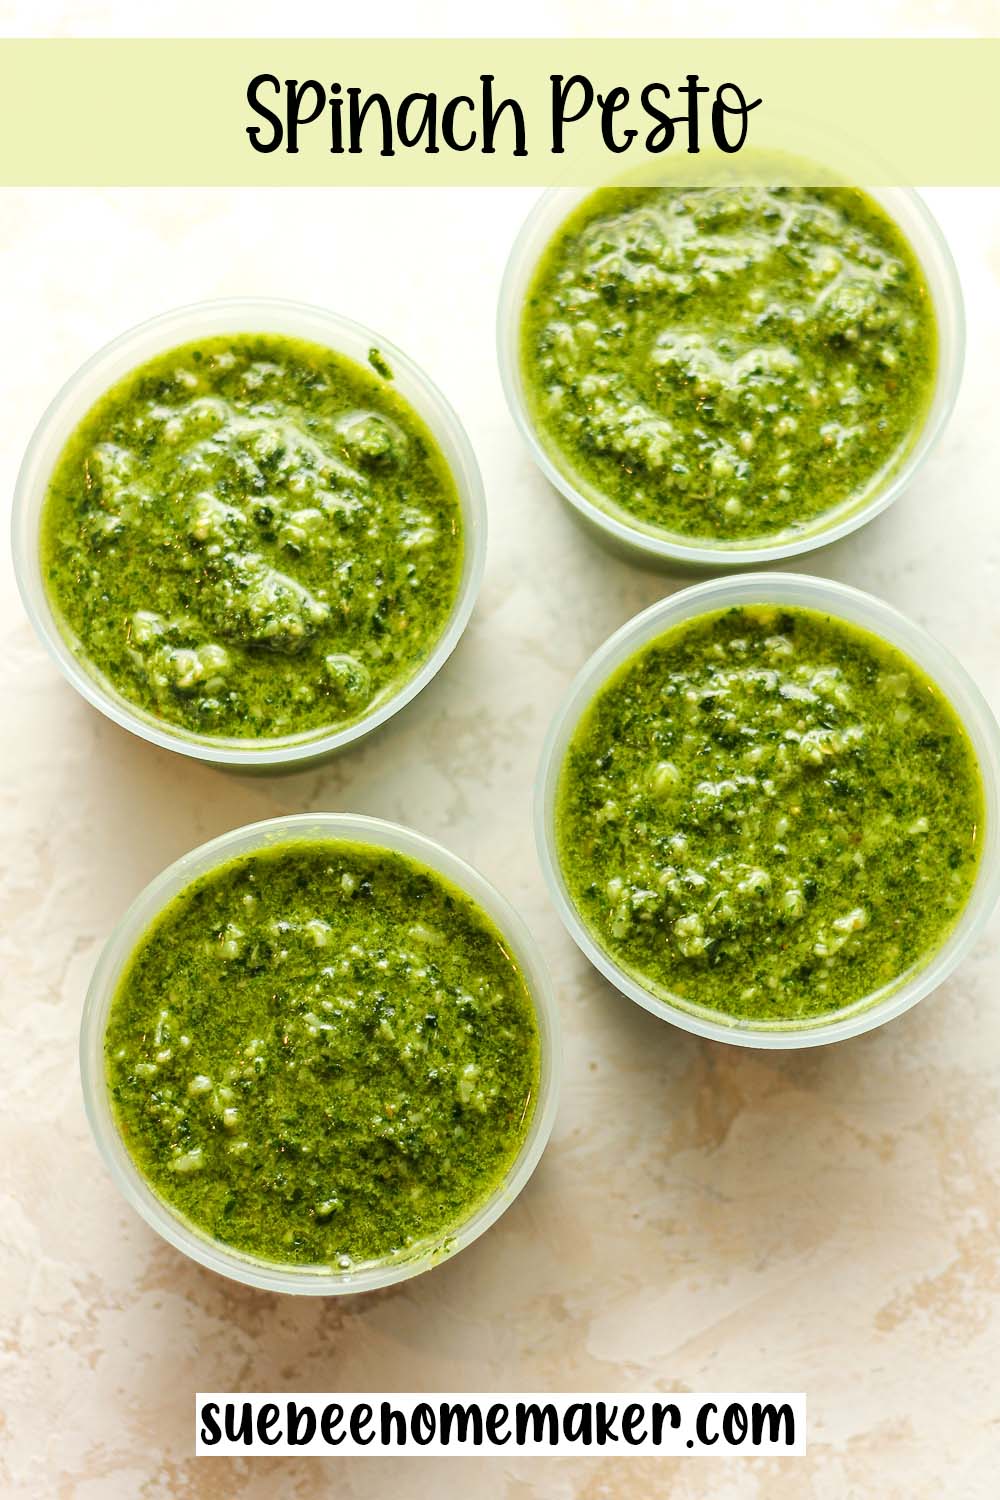 Four small containers of spinach pesto.